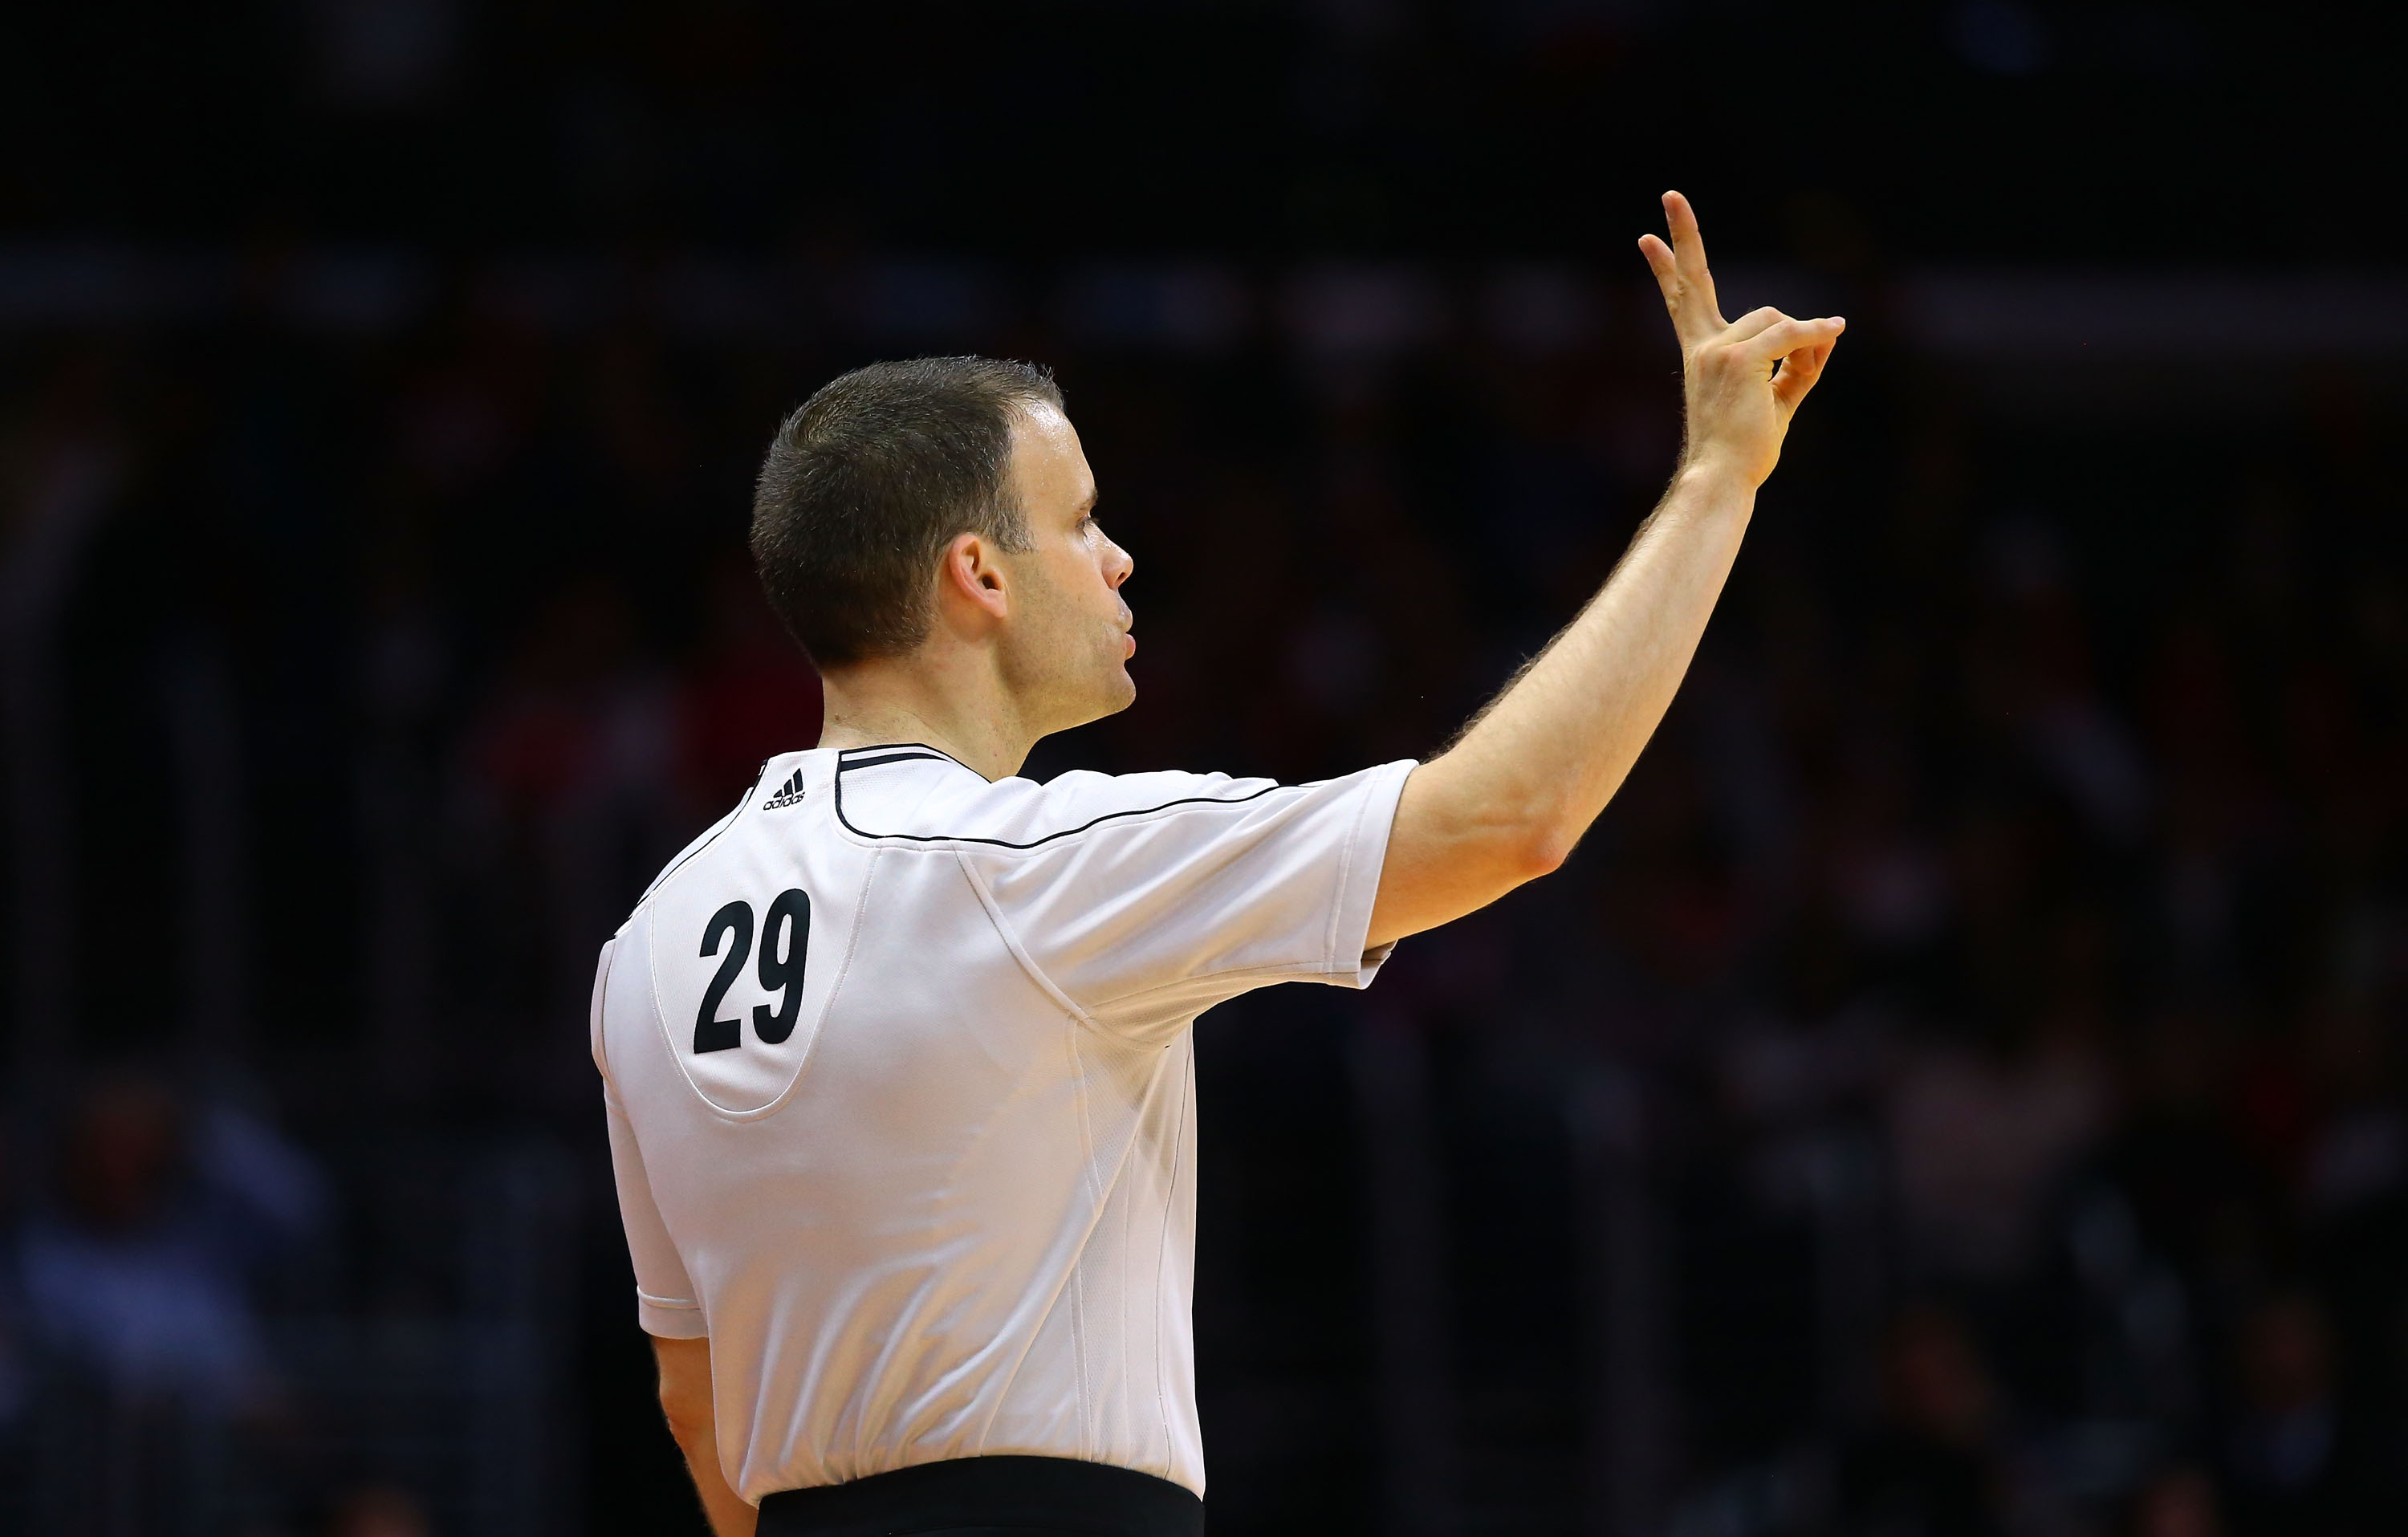 NBA referee Mark Lindsay #29 officiates the NBA game between the Los Angeles Clippers and the Phoenix Suns at Staples Center on Dec. 8, 2014 in Los Angeles. (Victor Decolongon—Getty Images)